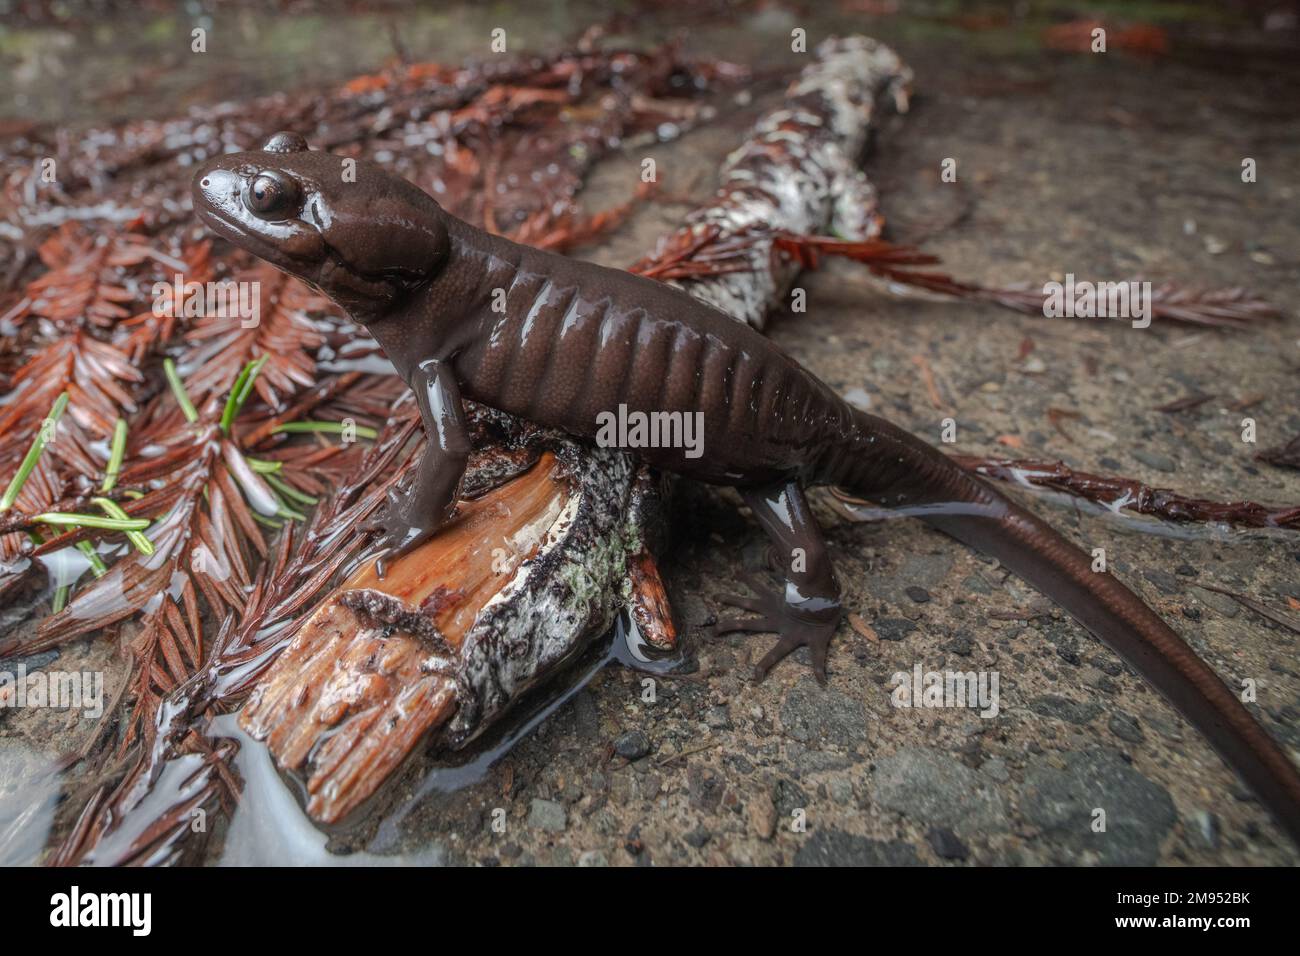 A northwestern salamander (Ambystoma gracile), a member of the mole salamanders family on the forest floor in Mendocino county, California, USA. Stock Photo